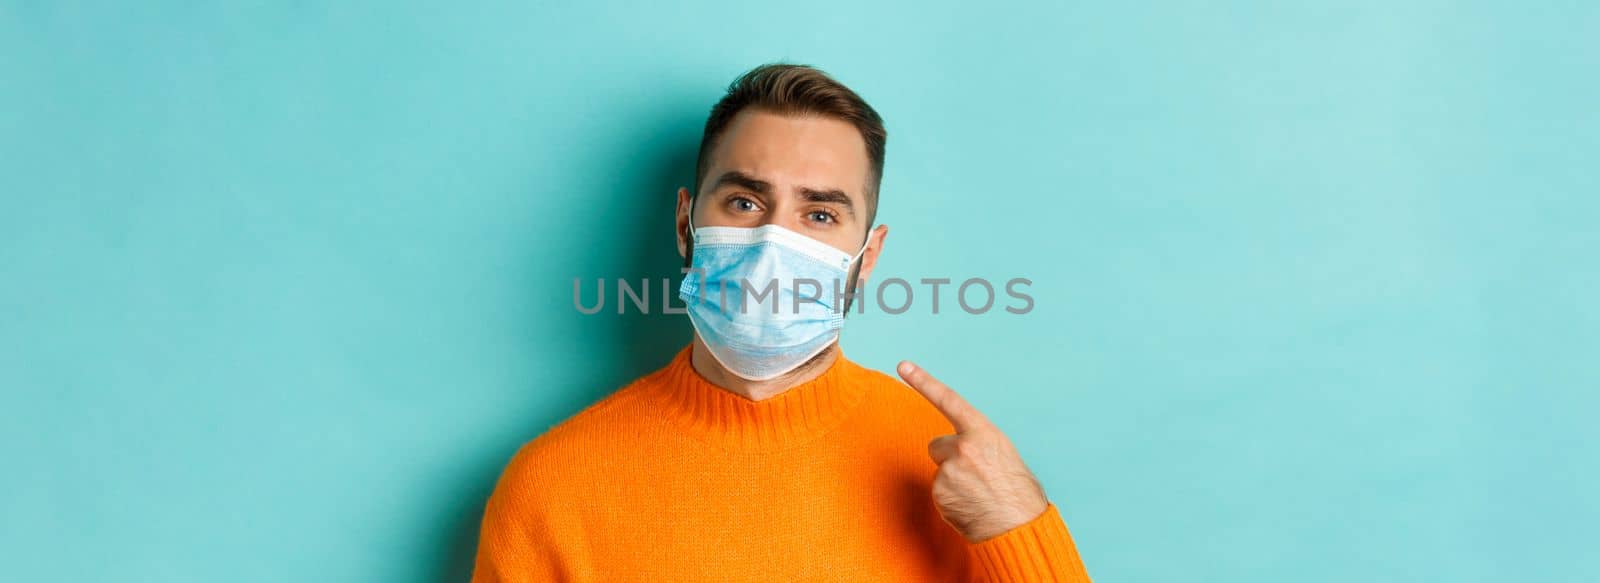 Covid-19, social distancing and quarantine concept. Upset man in complaining on face mask, pointing at it and looking bothered, standing over light blue background.